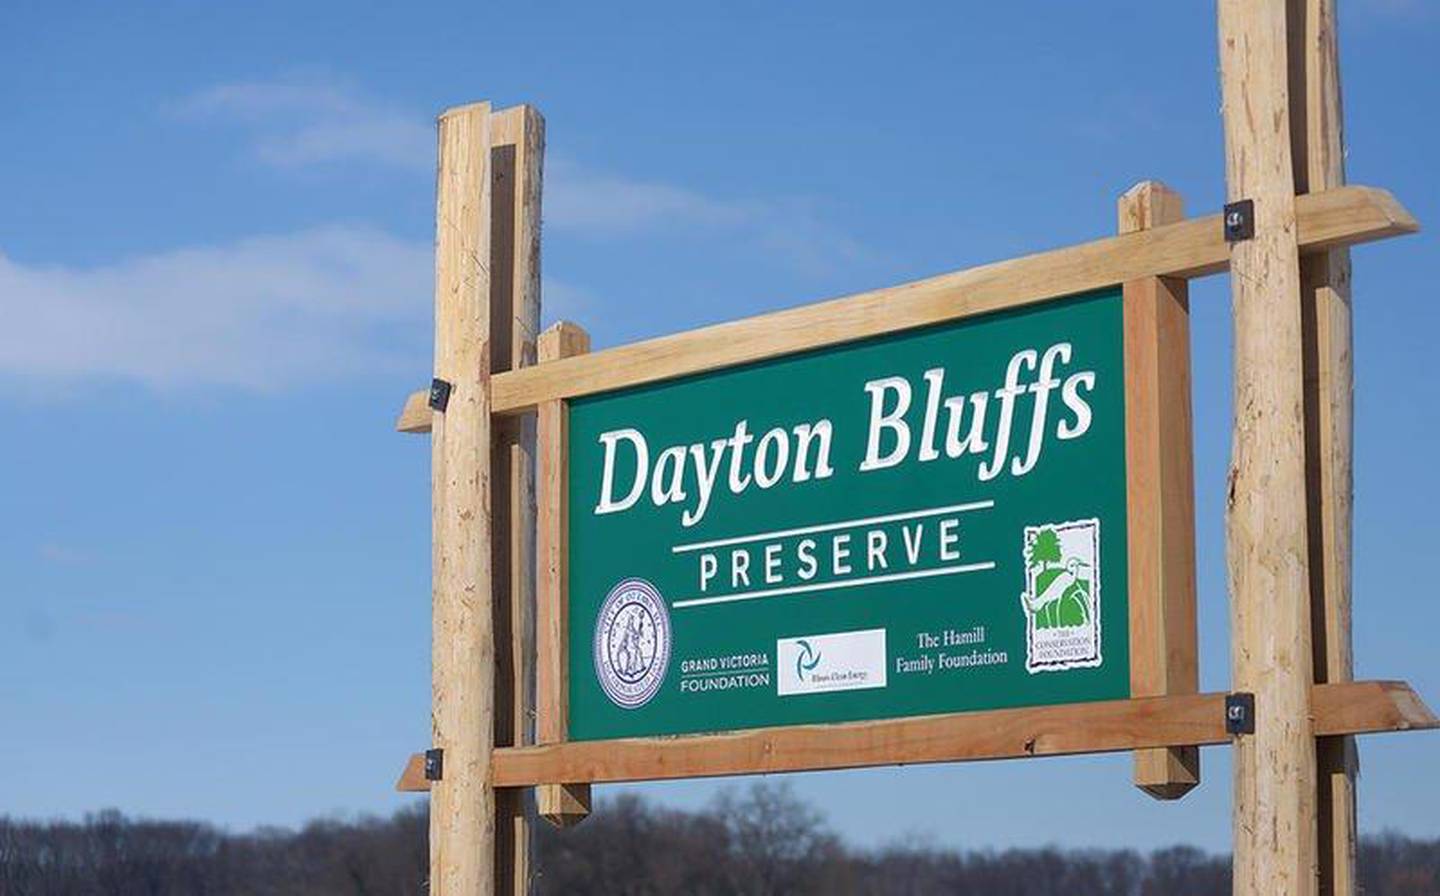 The Ottawa City Council authorized a grant application for a project at the 253-acre Dayton Bluffs Preserve that would be put towards putting in accessible parking to replace a gravel lot and provide paths instead of woodchip and grass-covered trails.